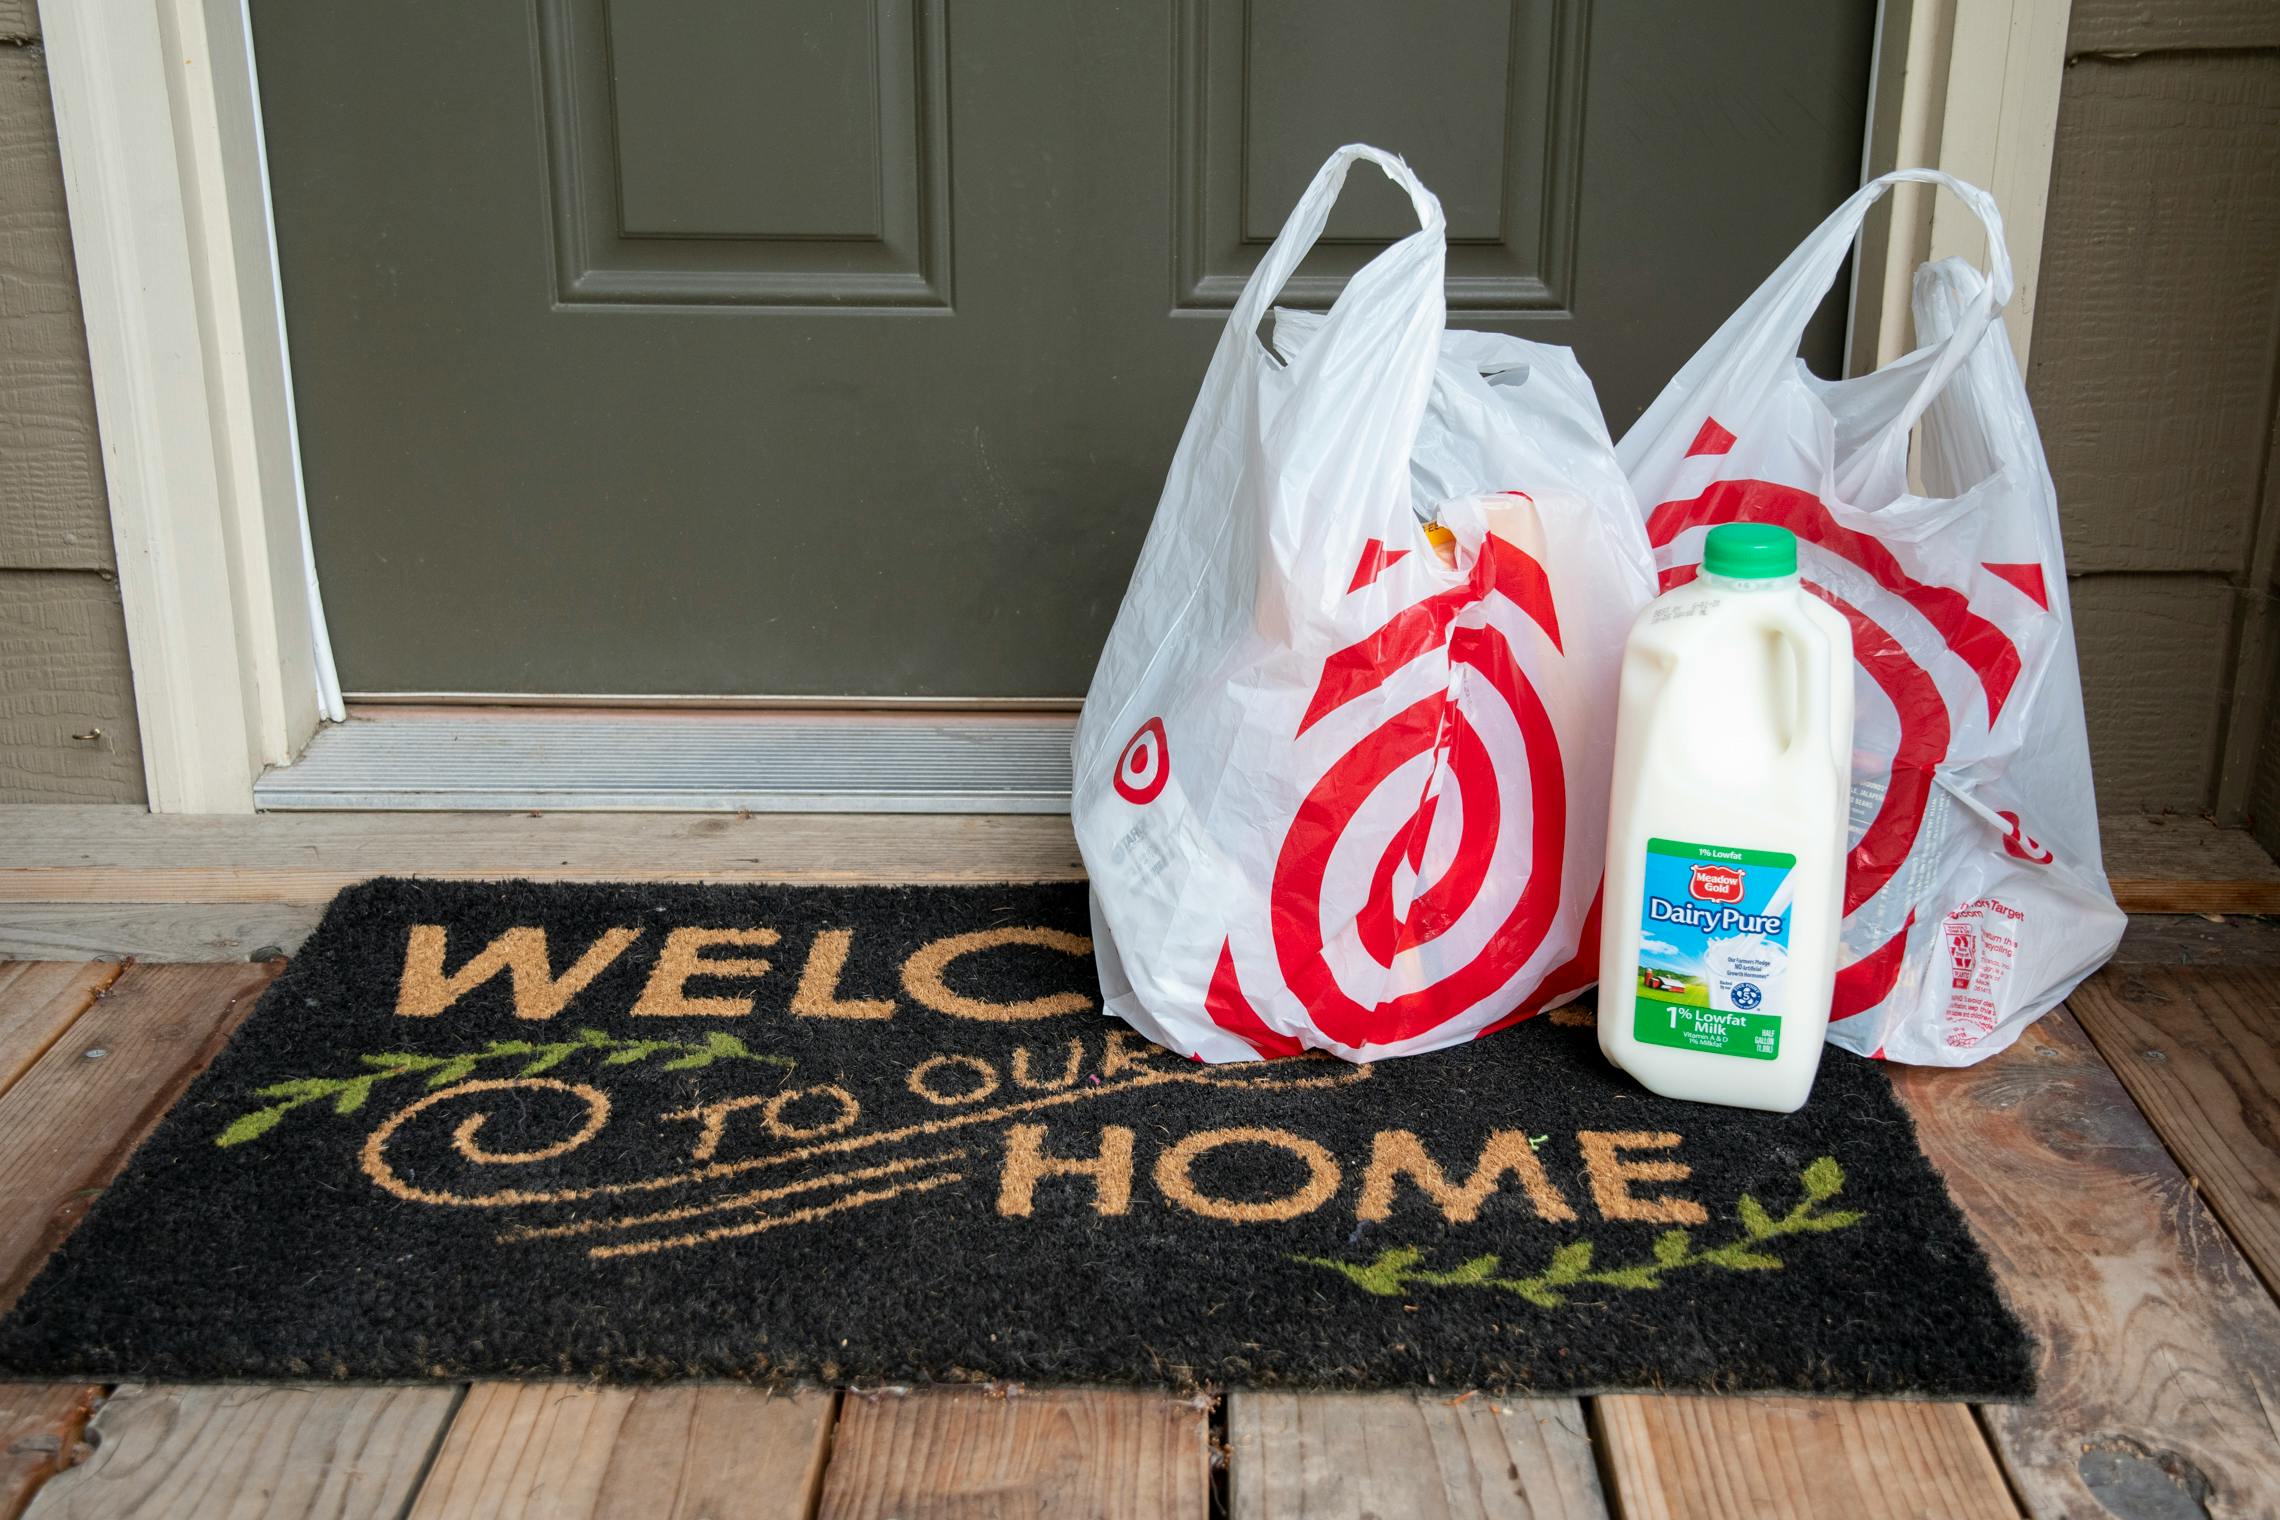 A Target Shipt grocery delivery order sitting on a front porch doormat that reads, "Welcome to our Home